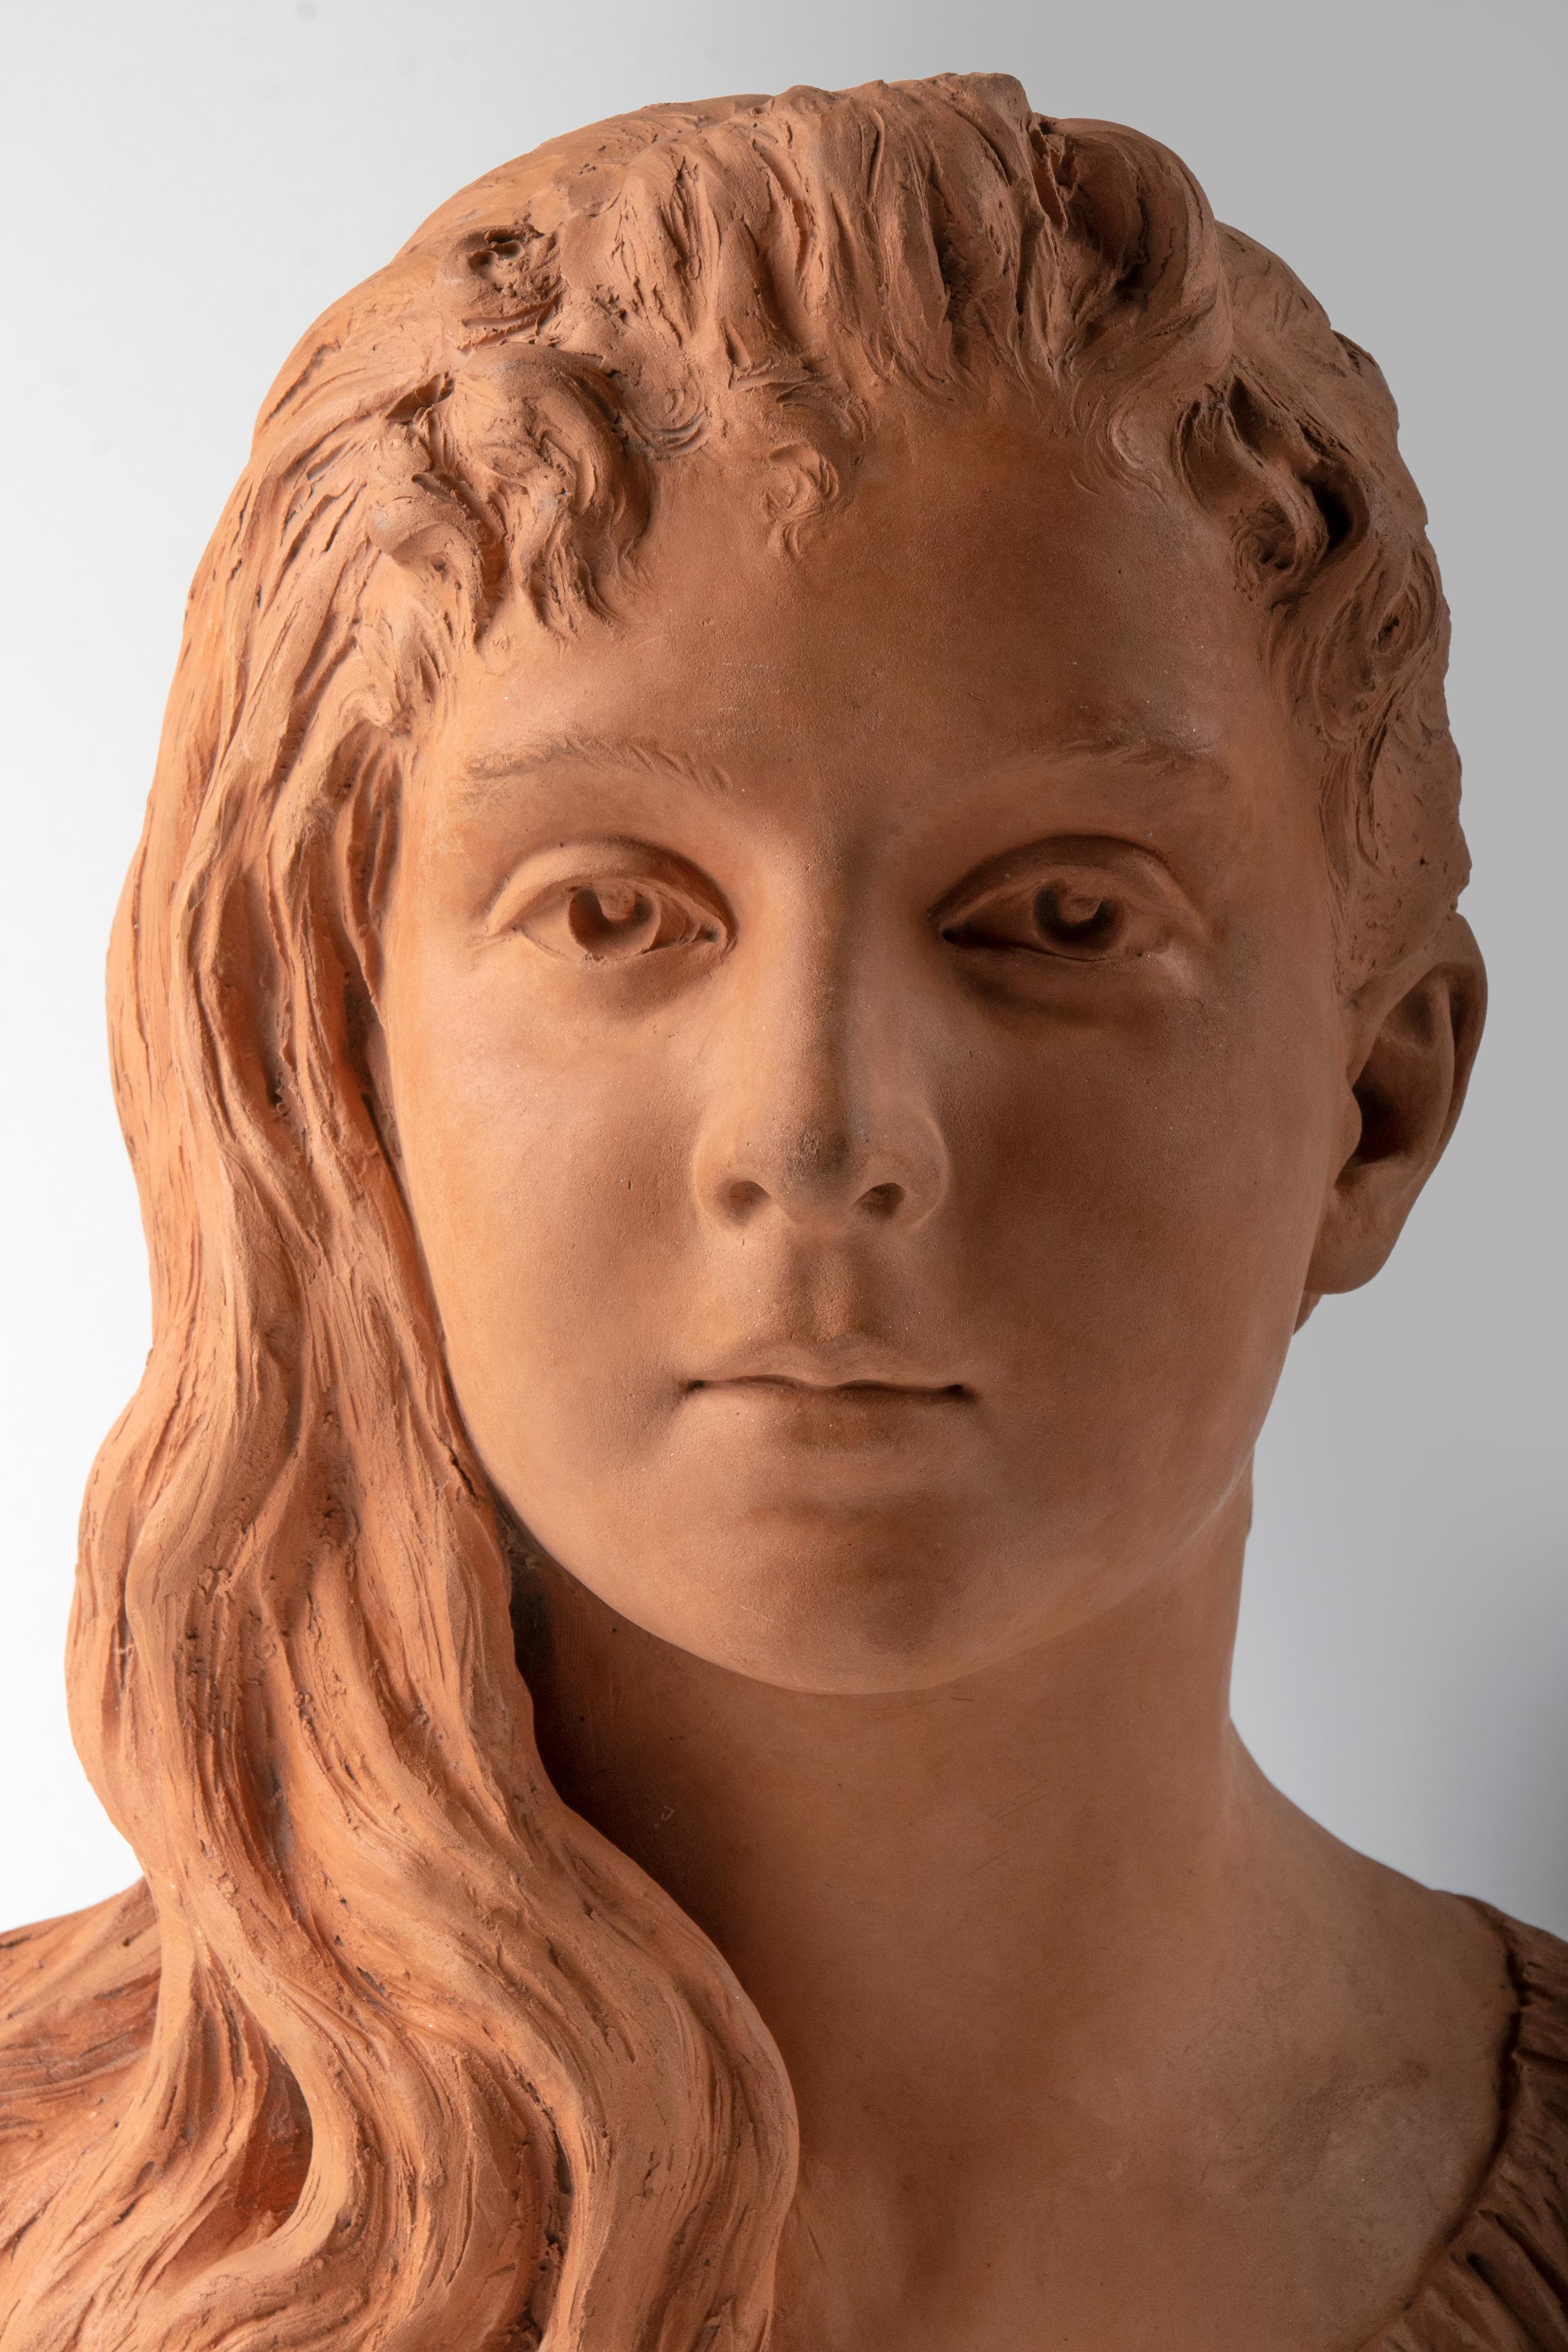 
Late 19th Century terracotta bust of a girl named Graziella. She has a sweet expression on her face. Nicely detailed sculpture. Signed on the side 'Marcel'. 

Most likely, this is a depiction of Graziella, a character created by the French author